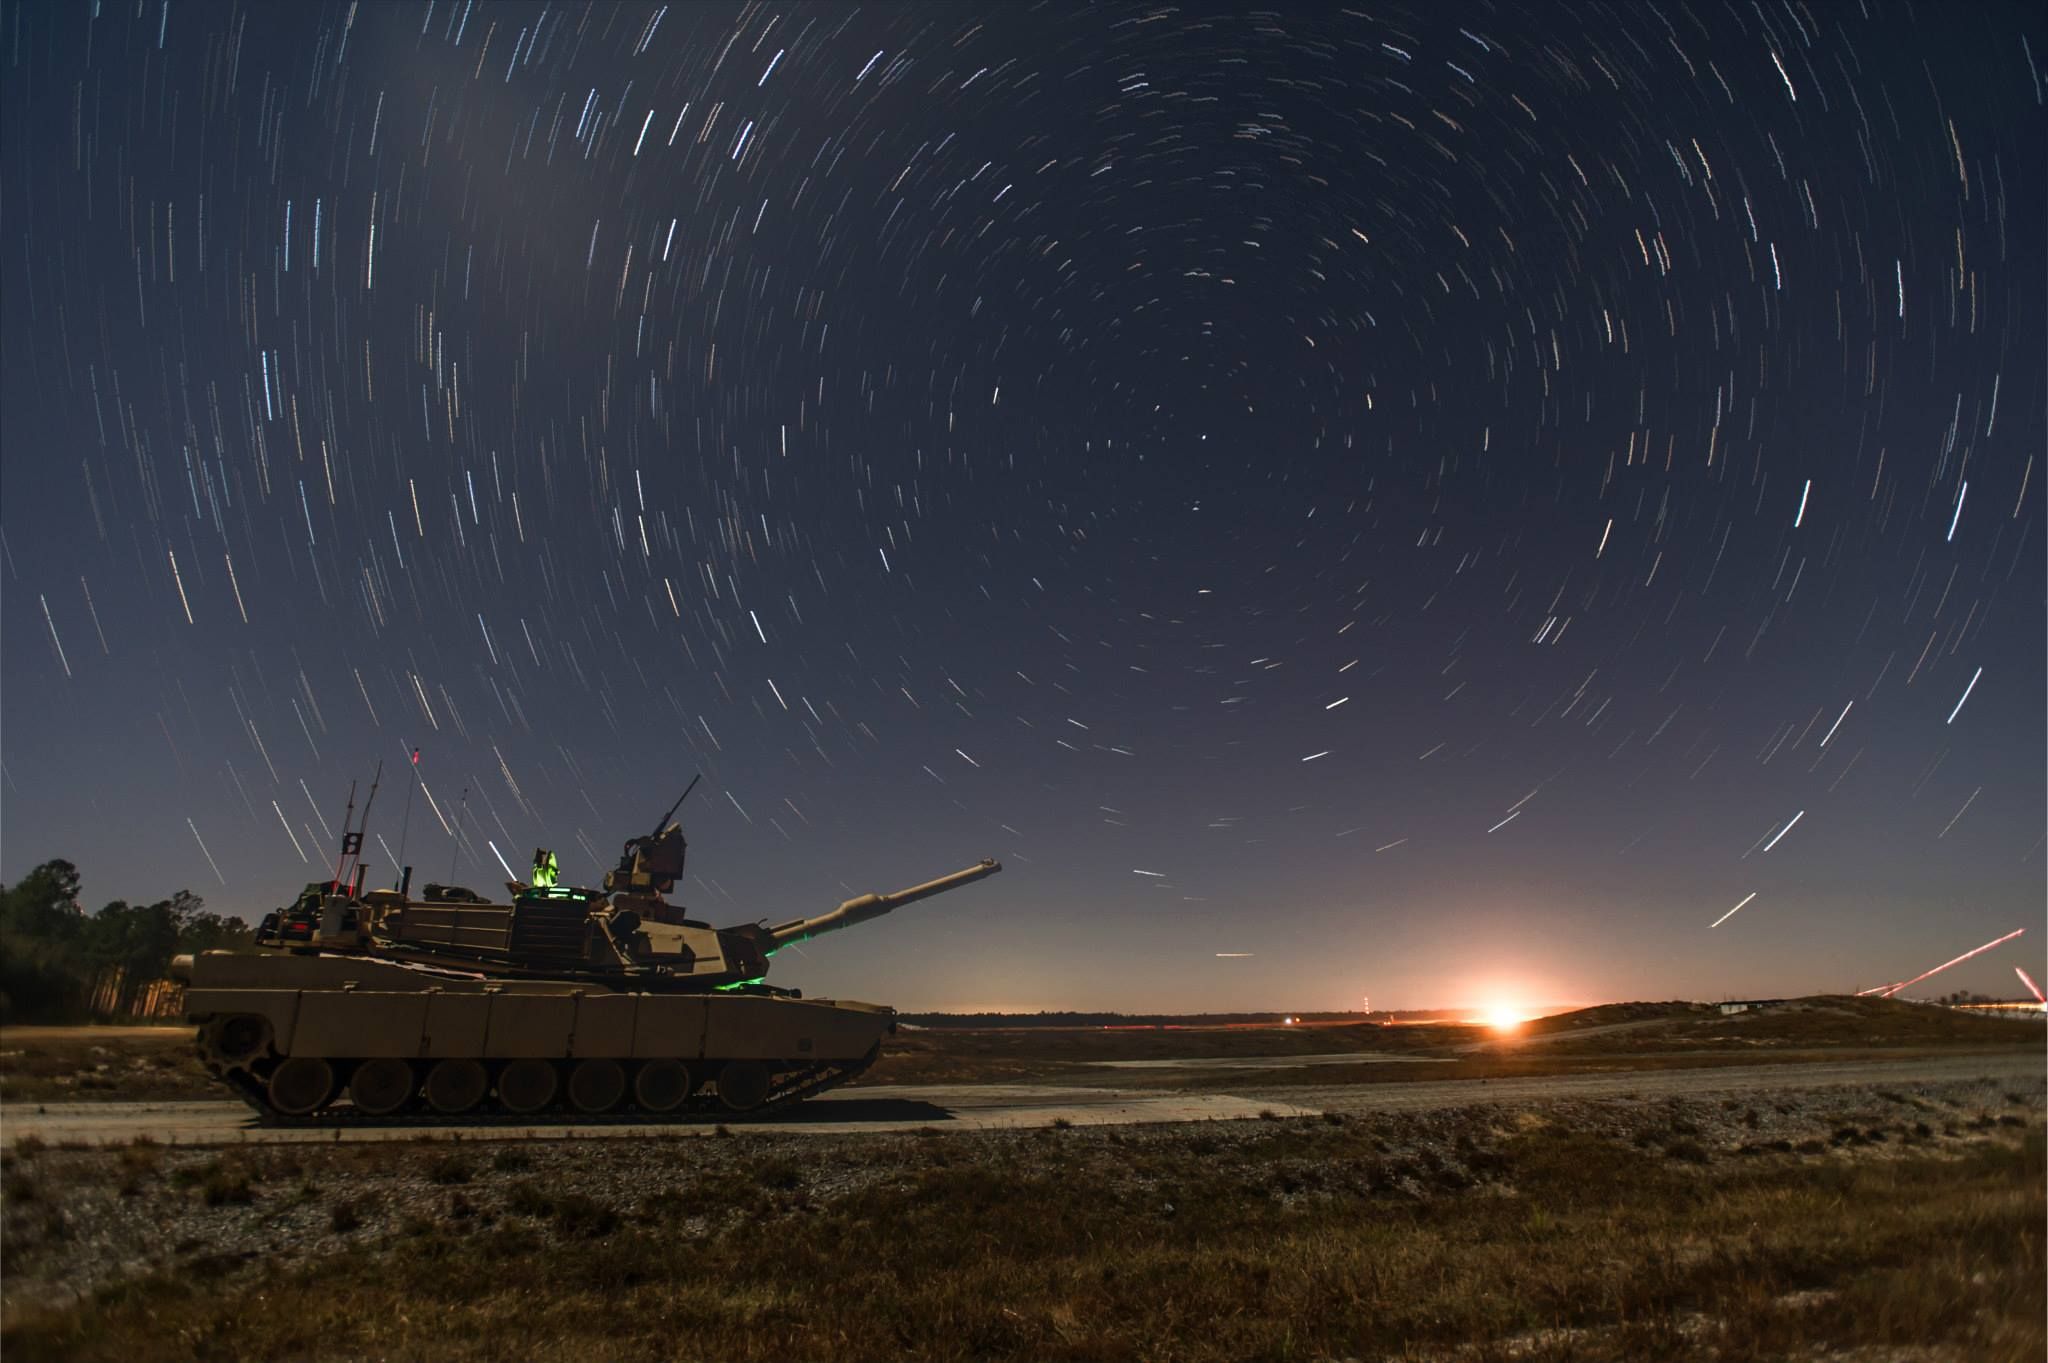 Sky, Night, Star, Vehicle, Astronomical object, Cloud, Space, Photography, Landscape, Tank, 